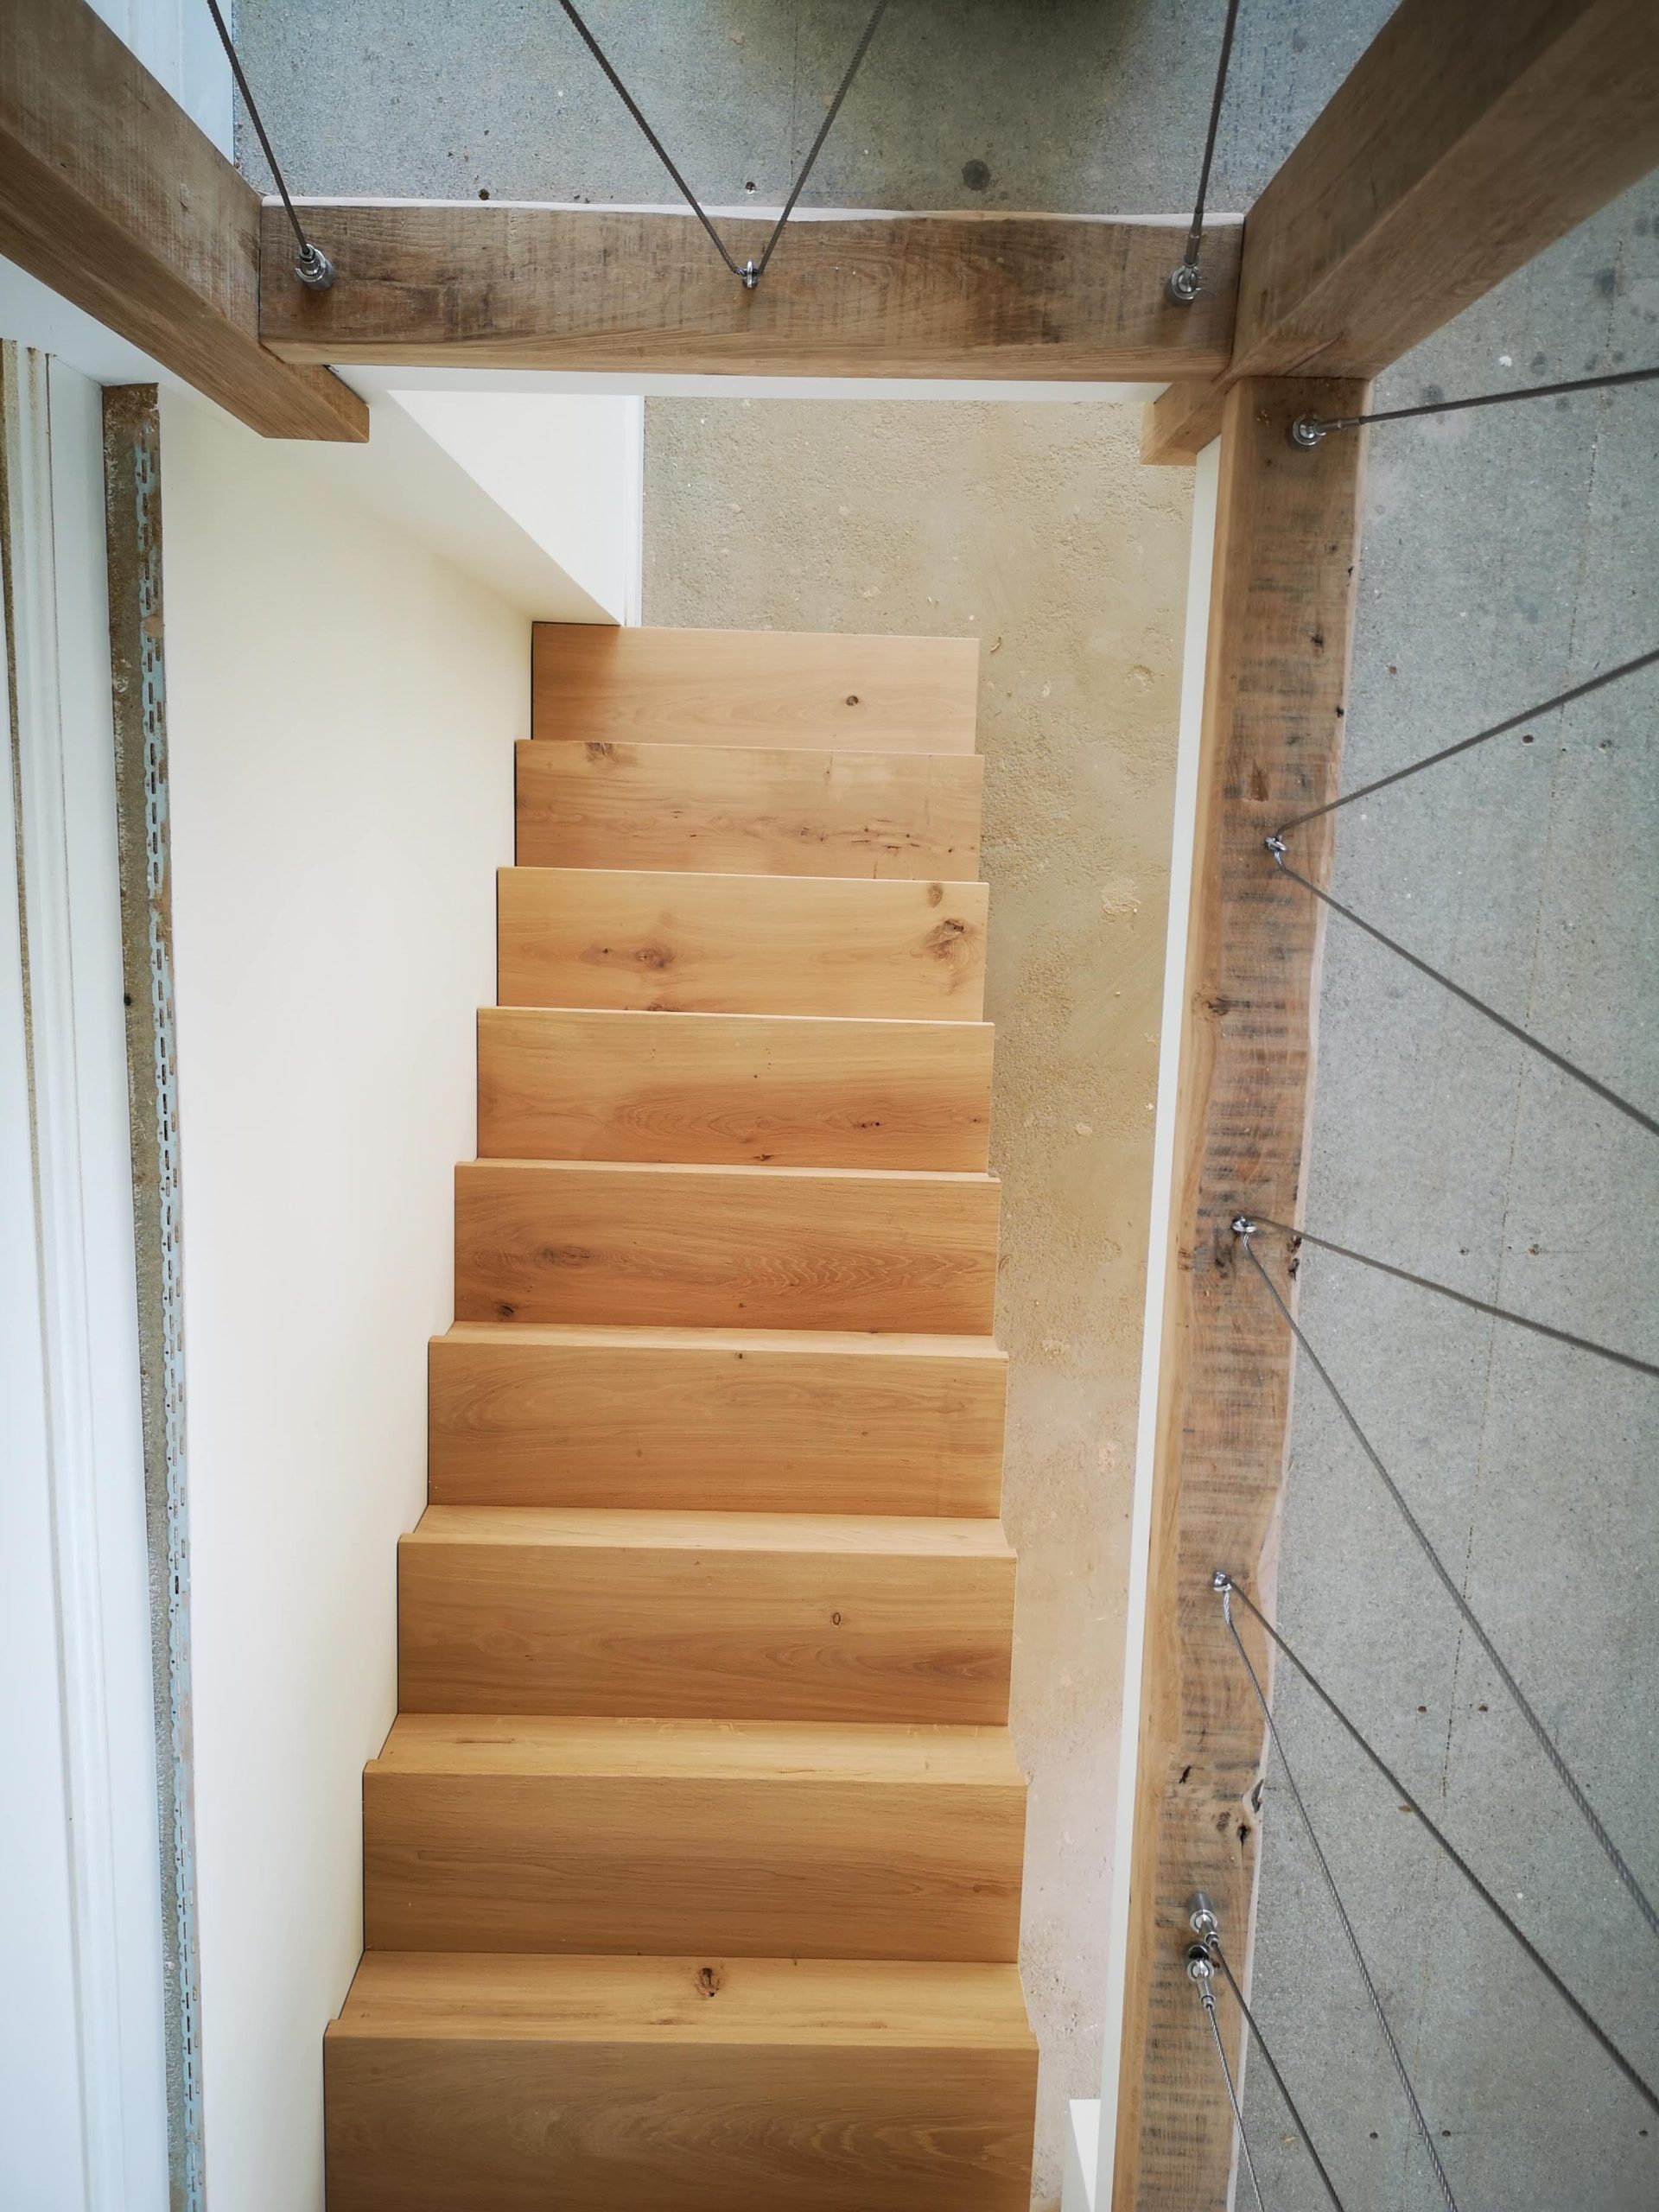 Bespoke timber stairs by Kings Stag Joinery